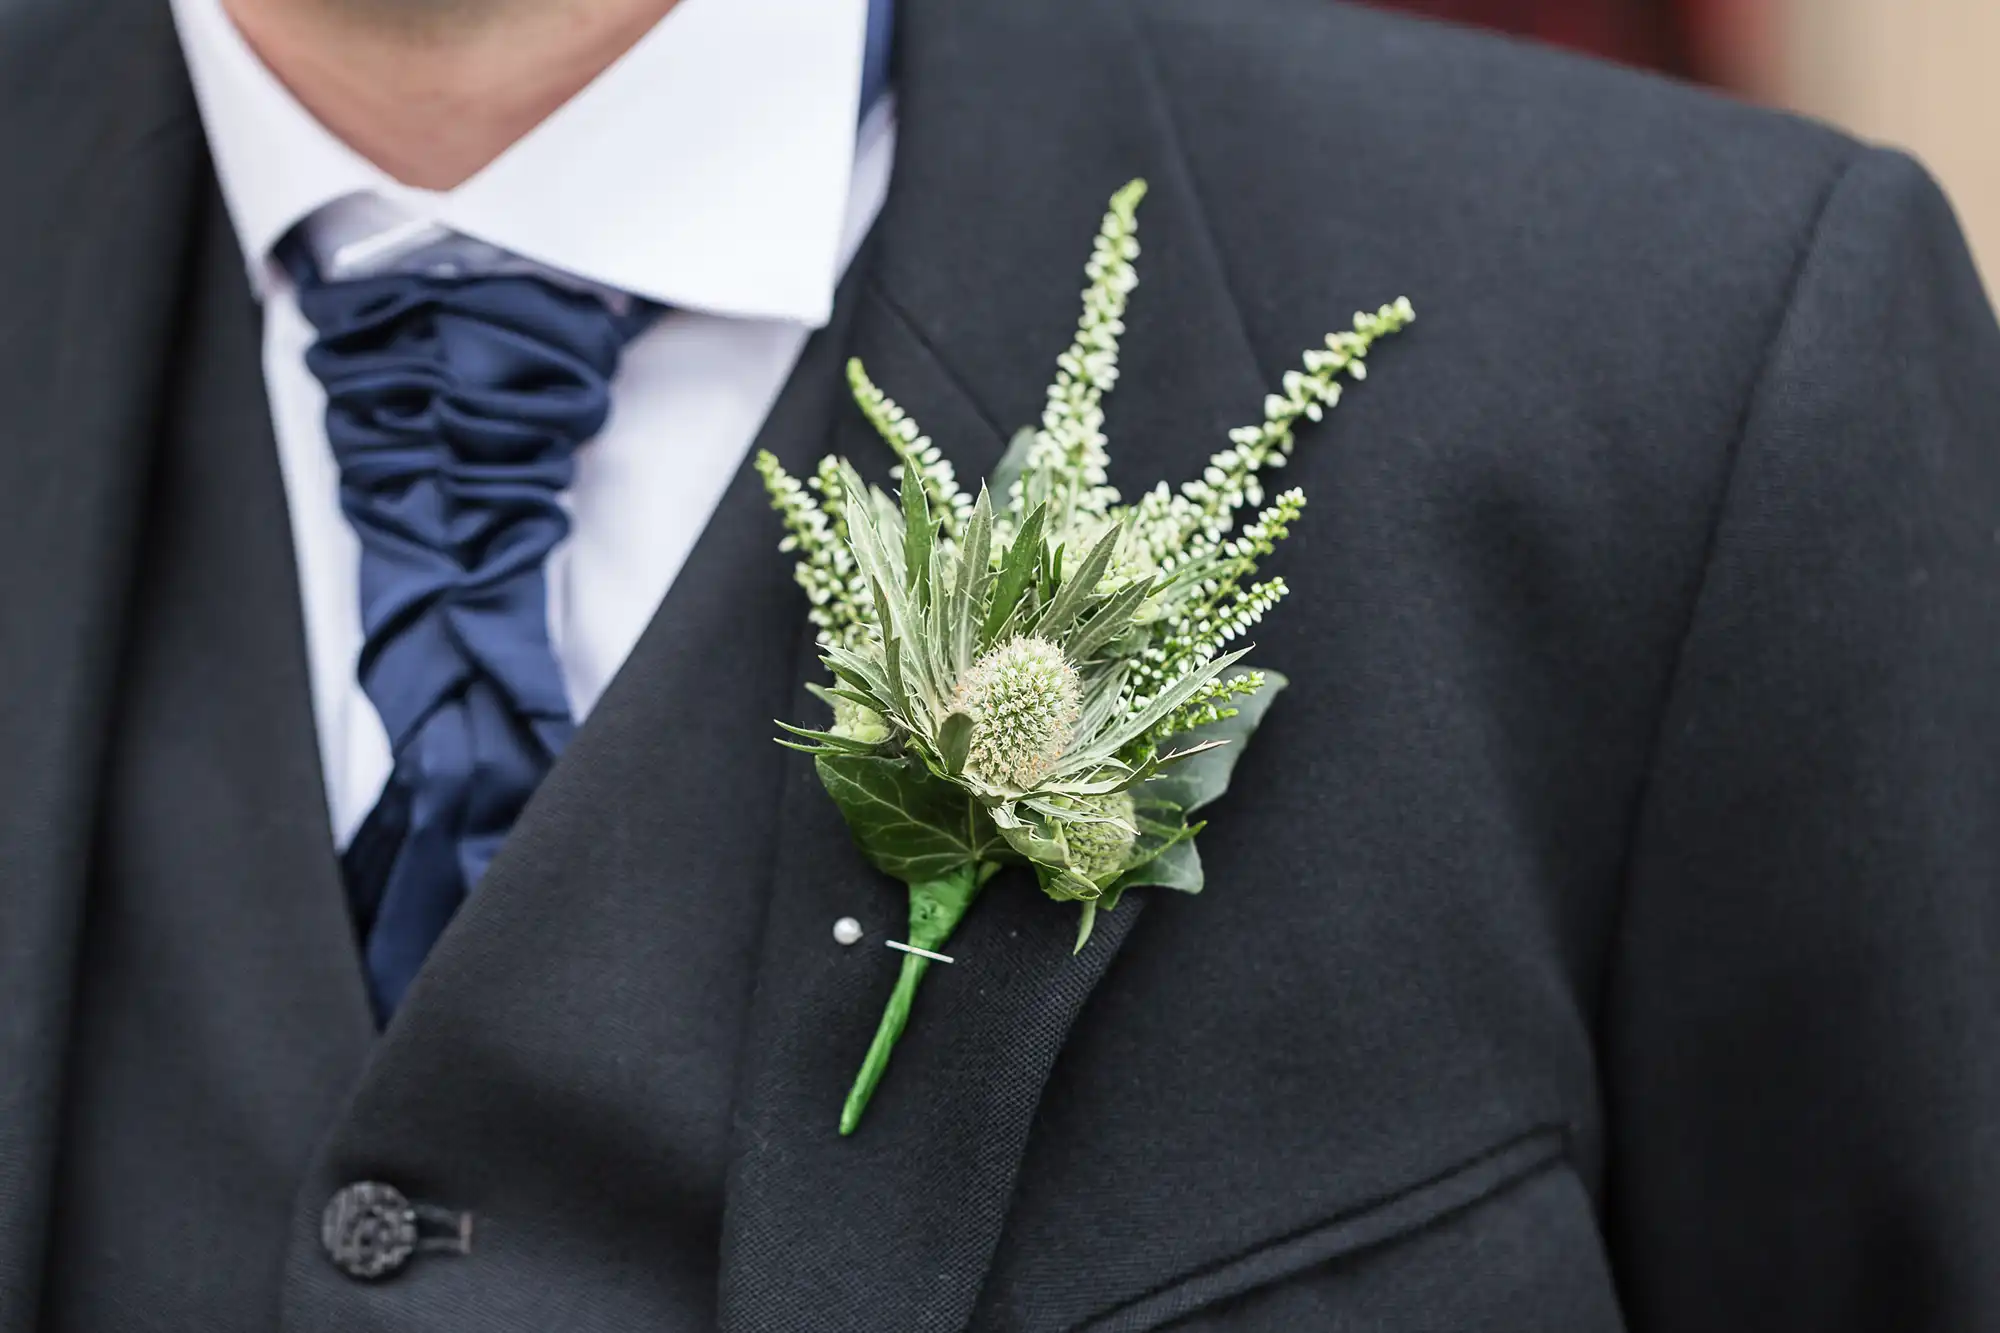 Close-up of a man in a suit with a blue ruffled tie, wearing a green and white floral boutonniere on his lapel.